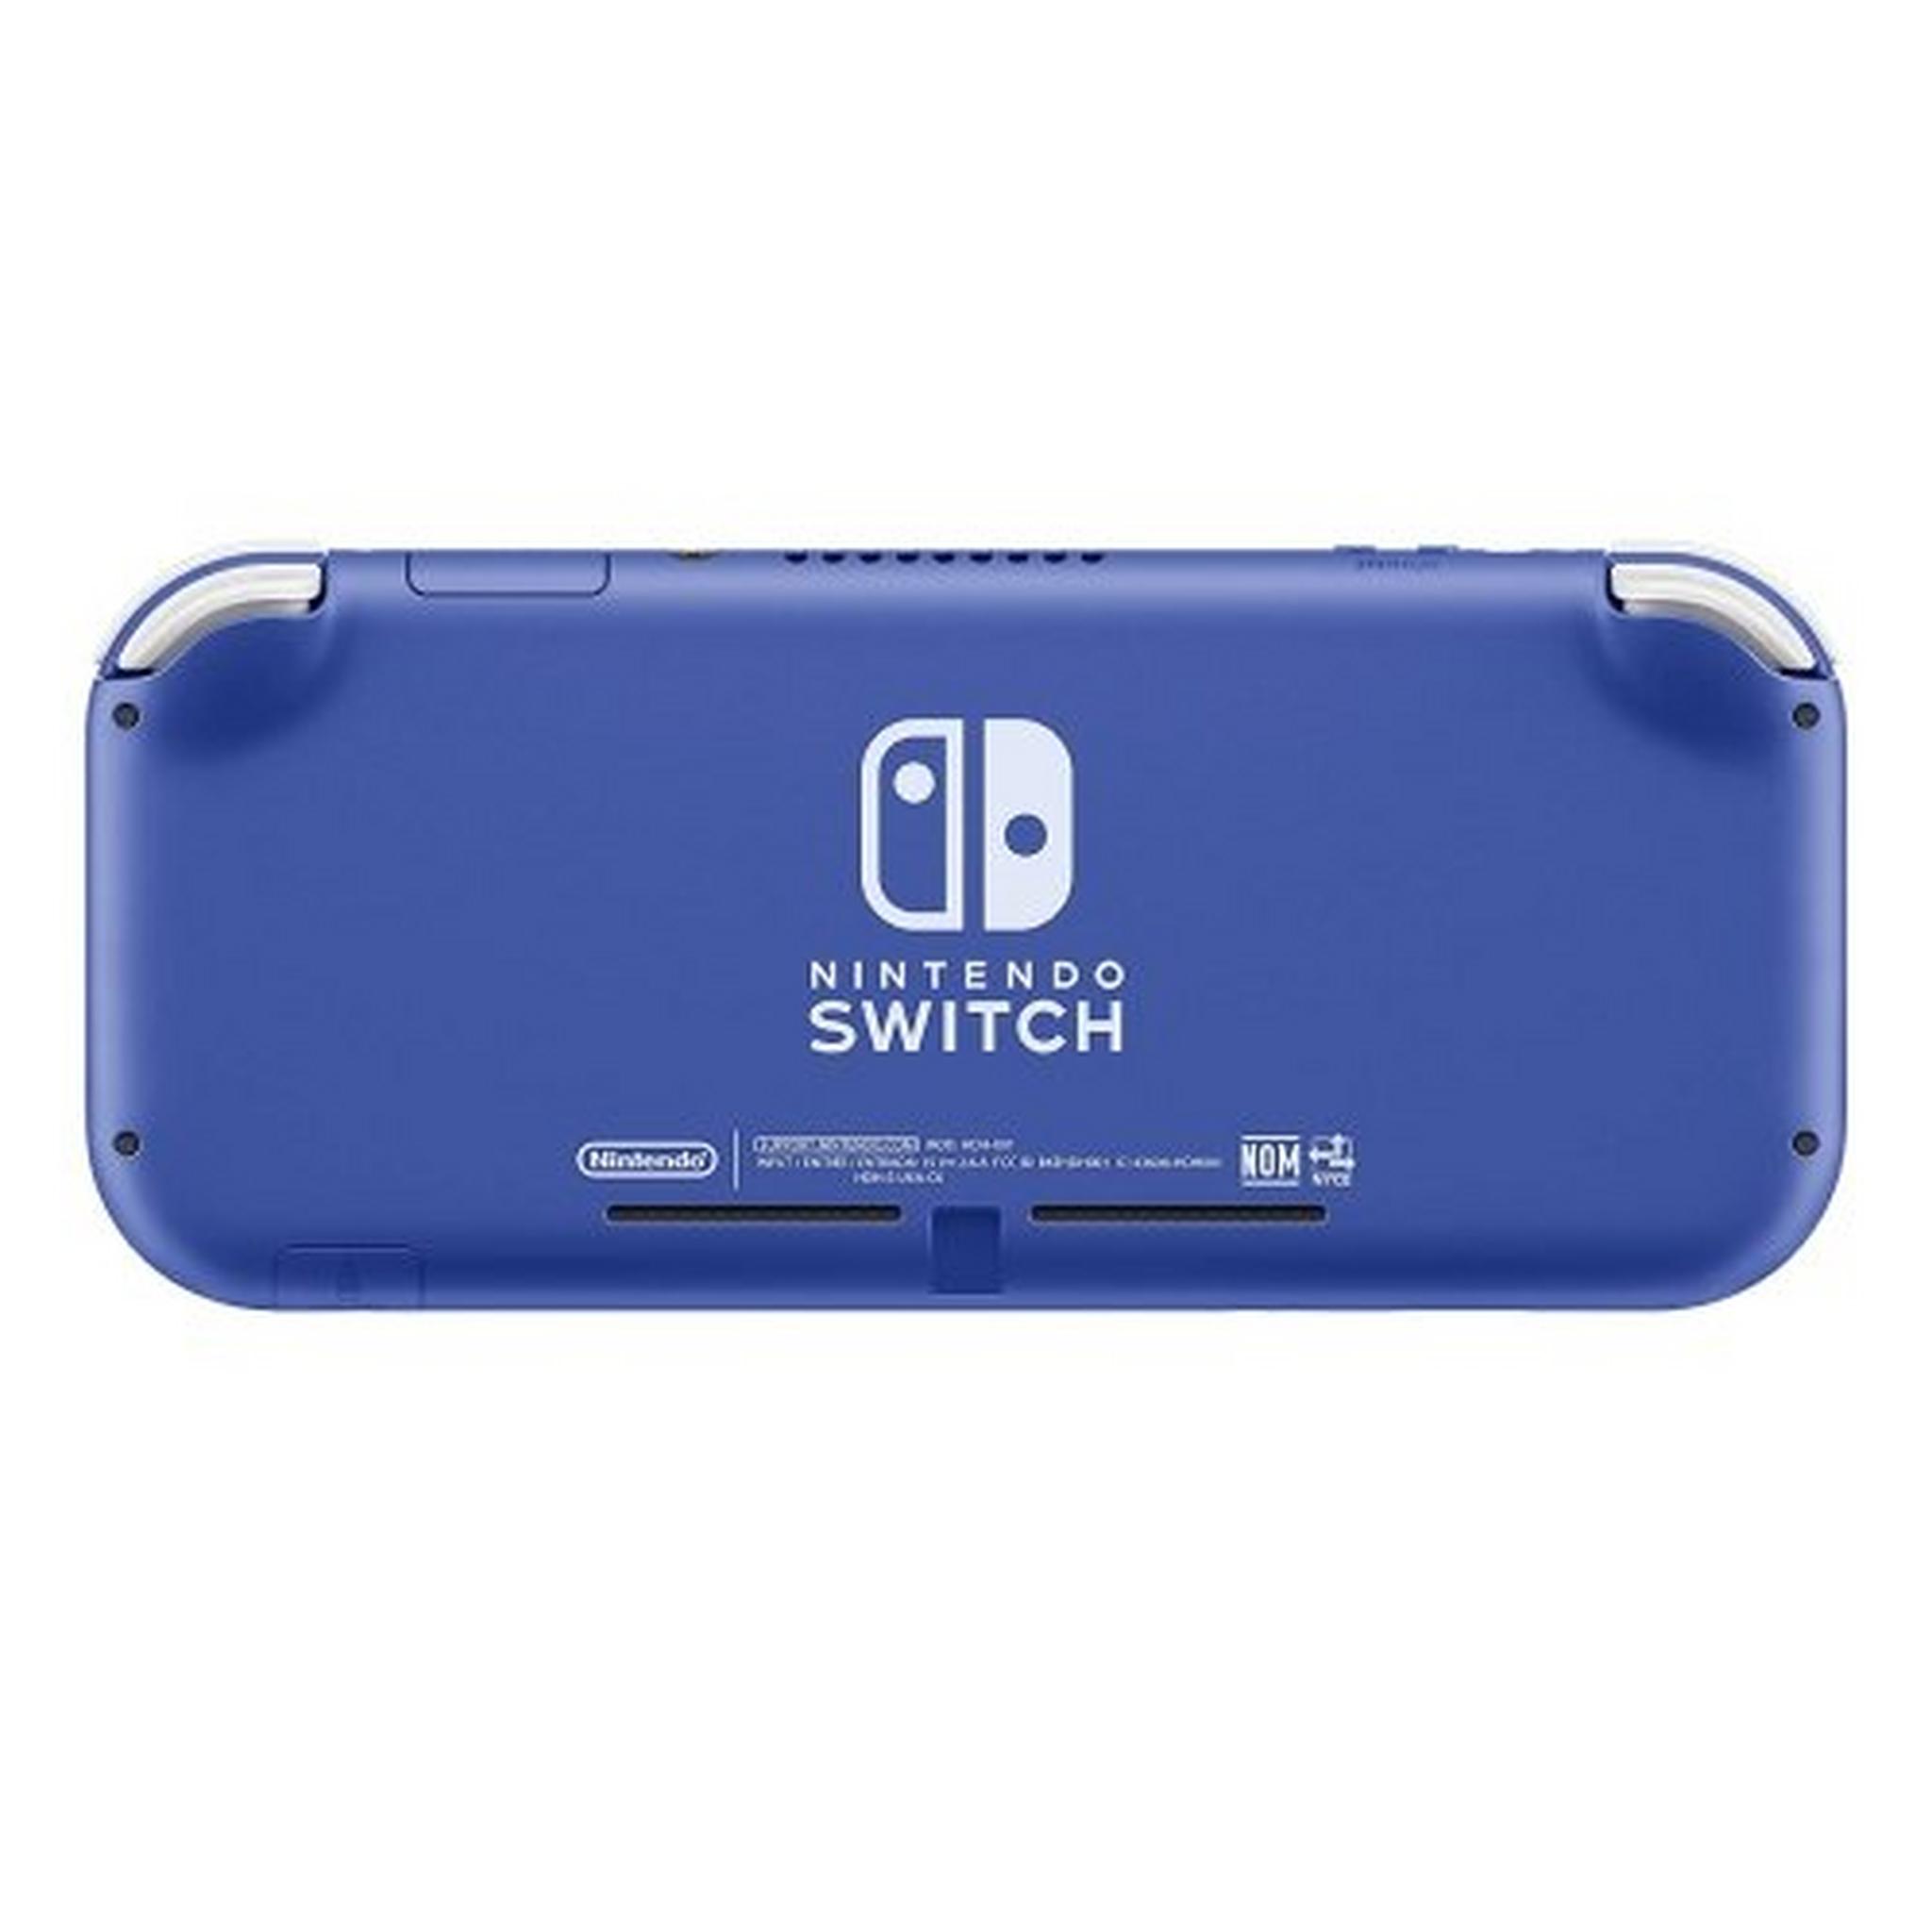 Nintendo Switch Lite Gaming Console, NS-LIGHT-BLUE - Blue